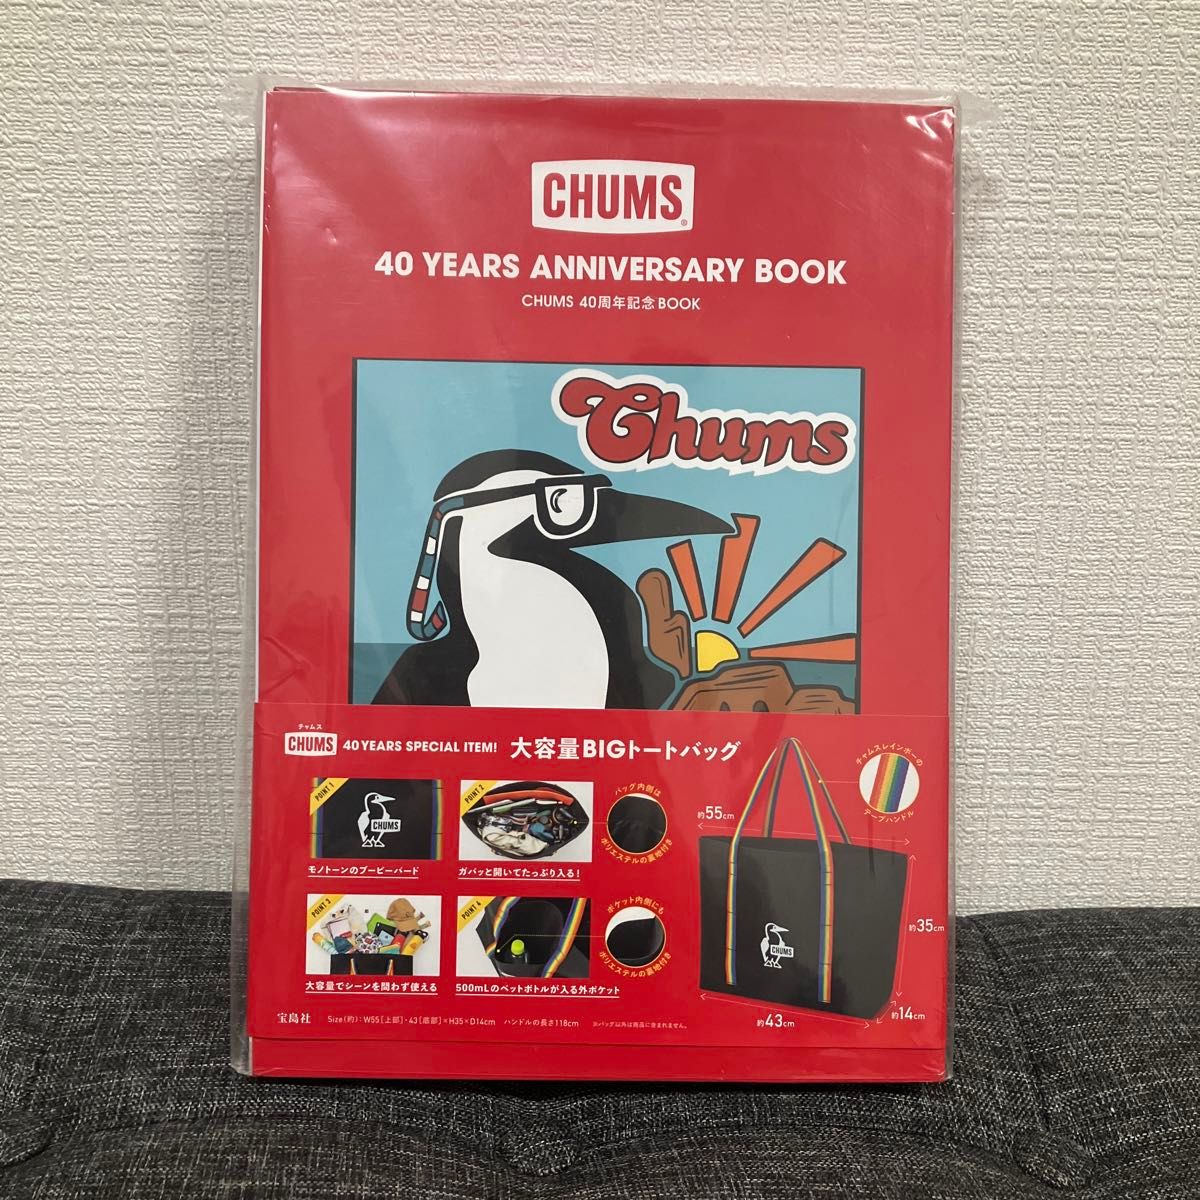 CHUMS 40YEARS ANNIVE CHUMS チャムス 新品 大容量 ビッグ トートバッグ ムック本